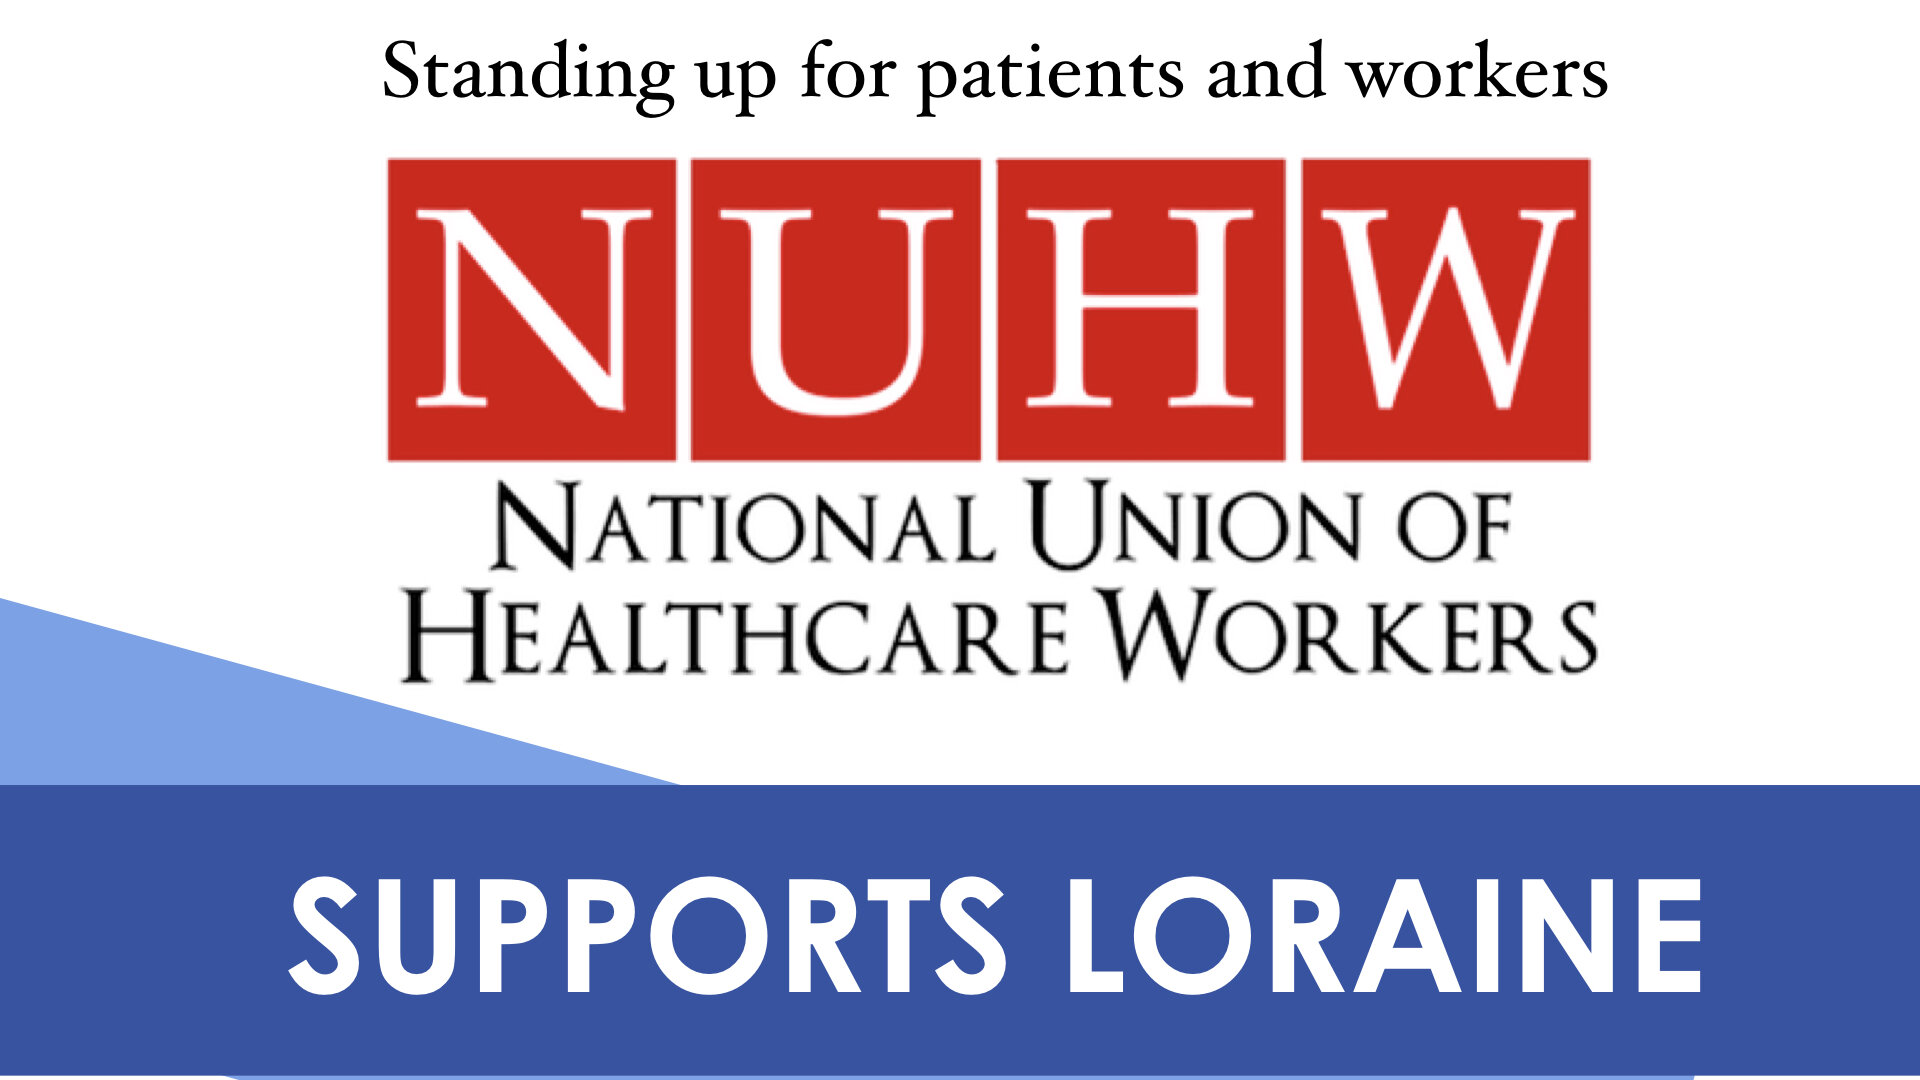 National Union of Healthcare Workers